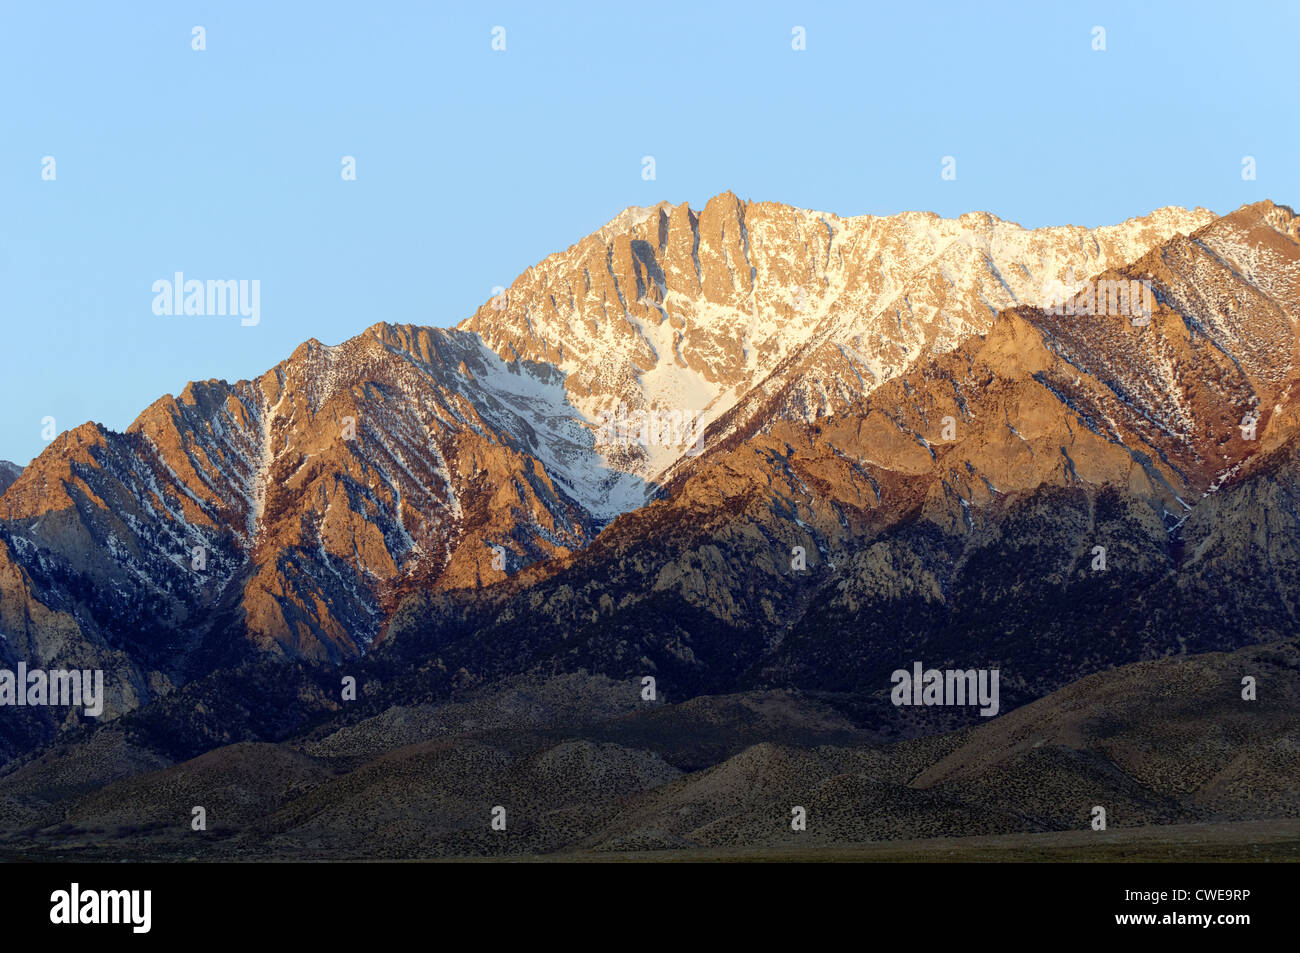 Sierra Nevada Mountains, seen from Independence, California, USA. Stock Photo